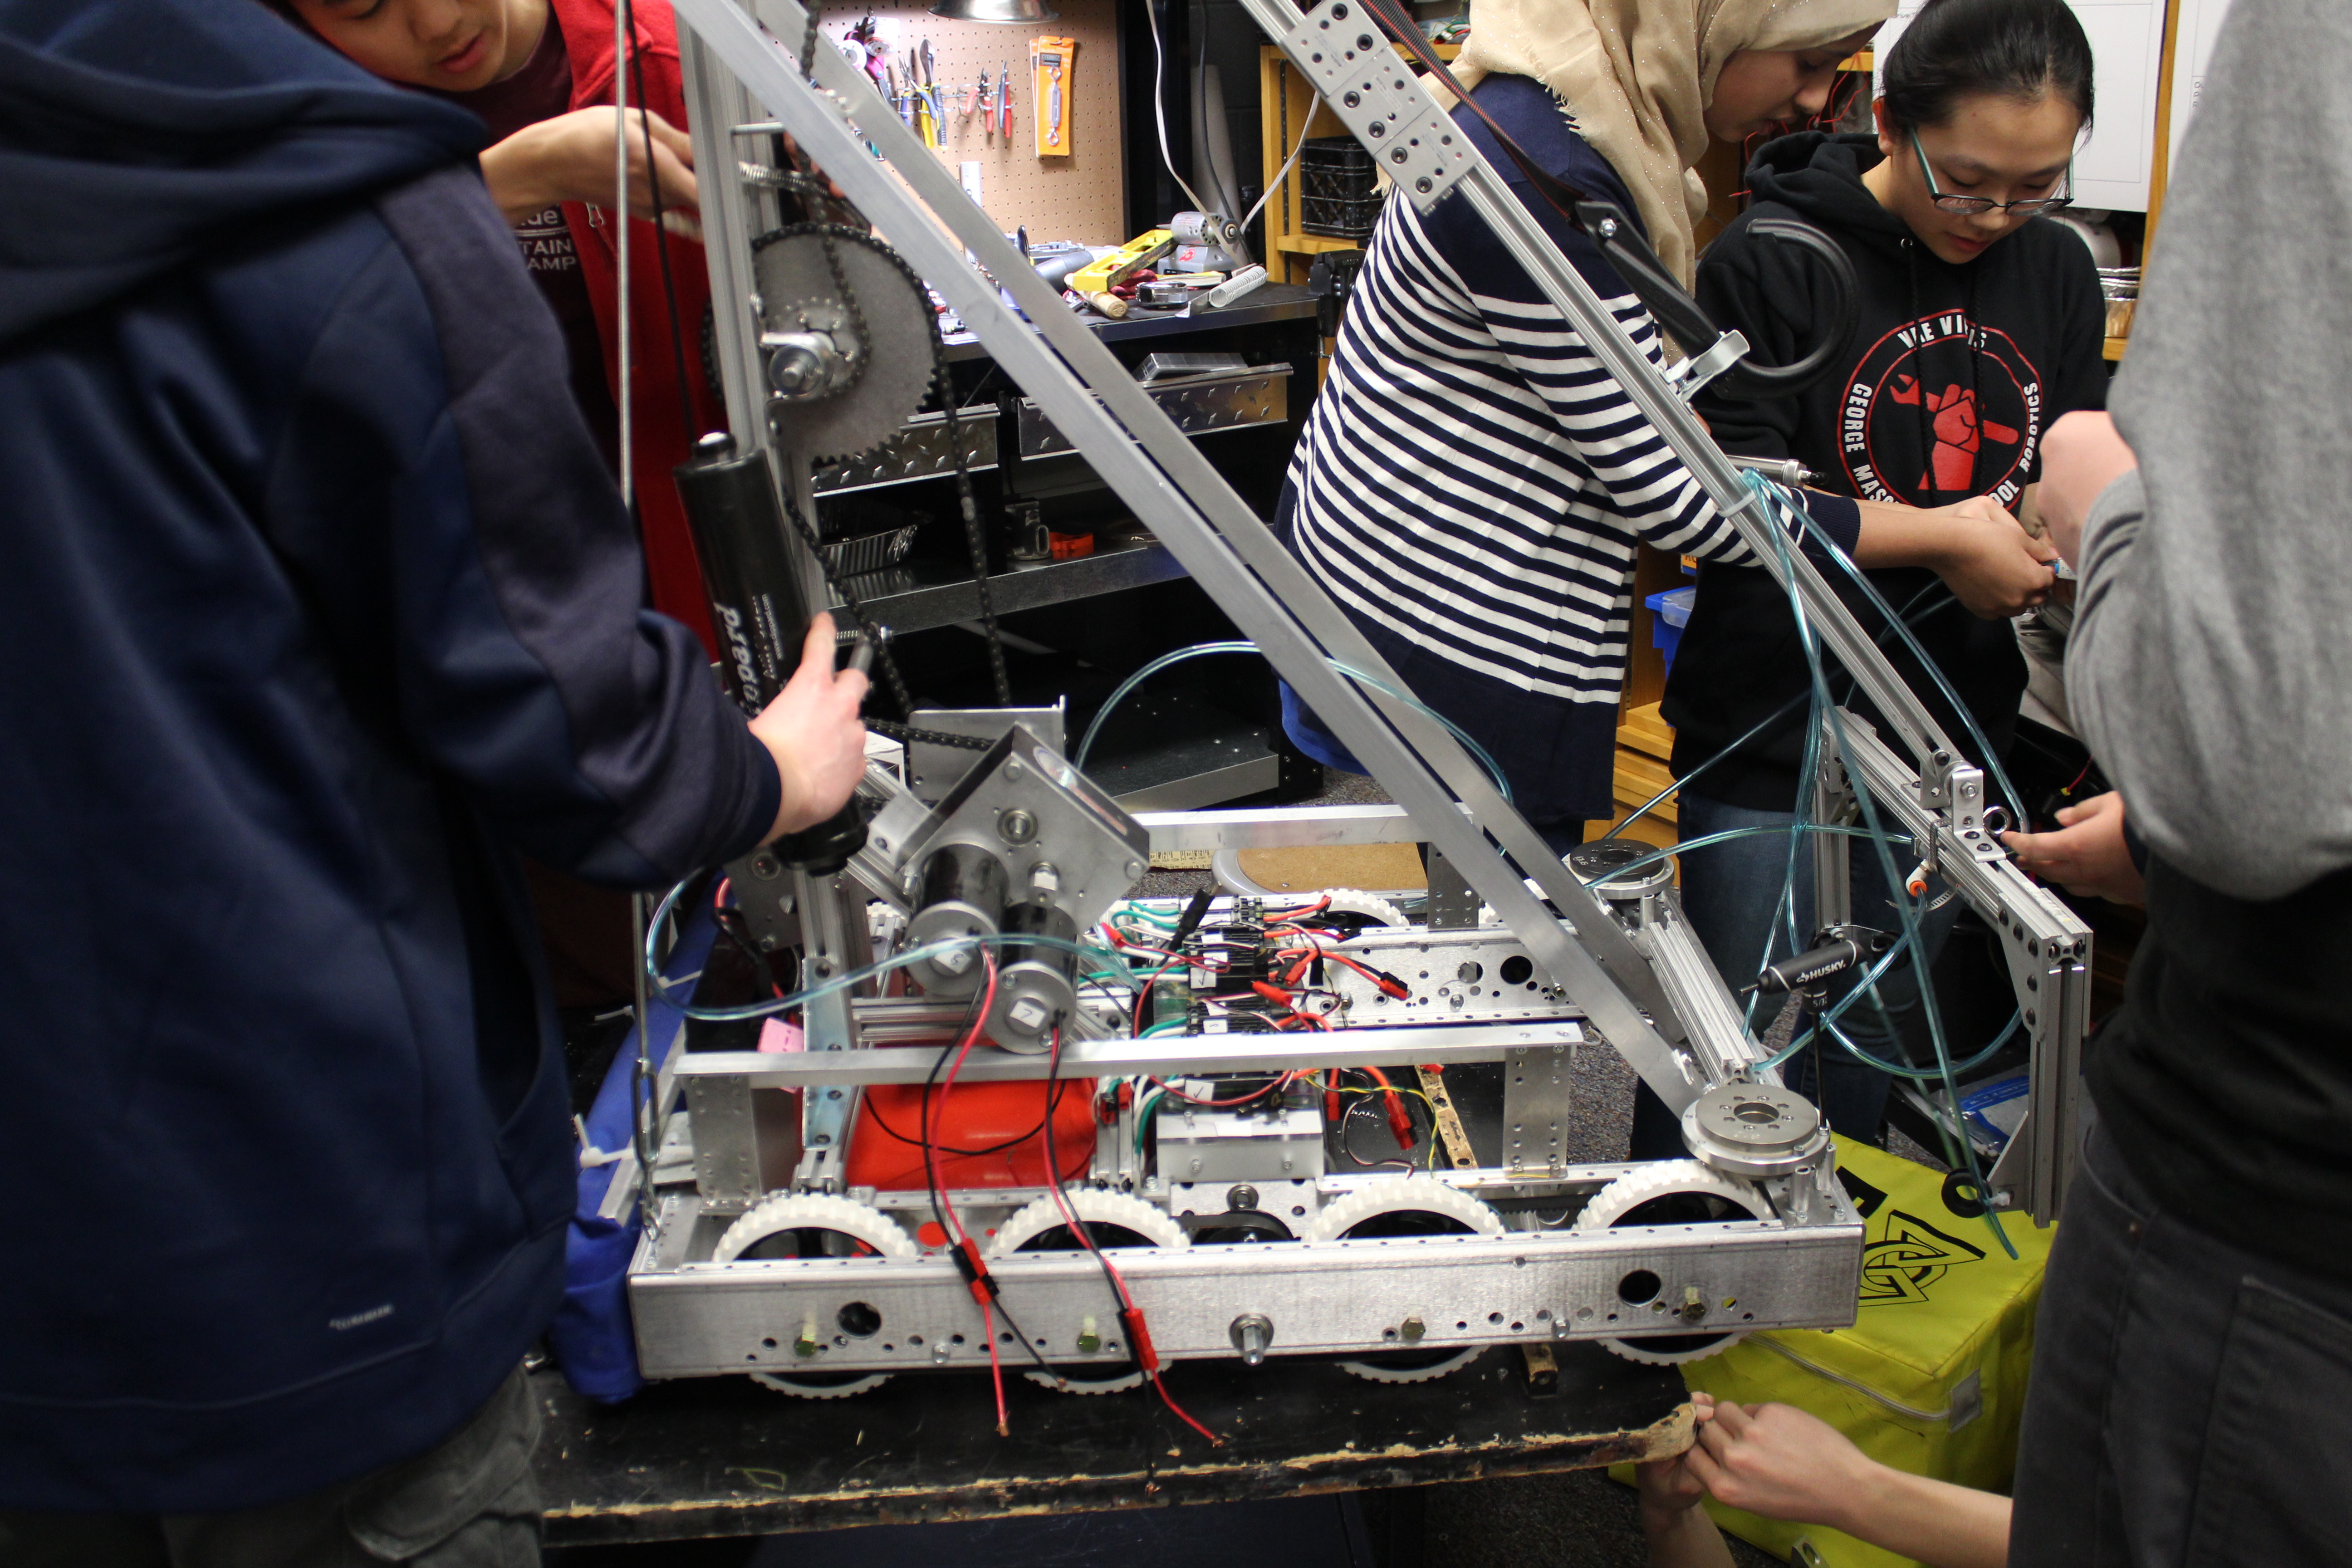 This shows us working on an earlier version of our robot.